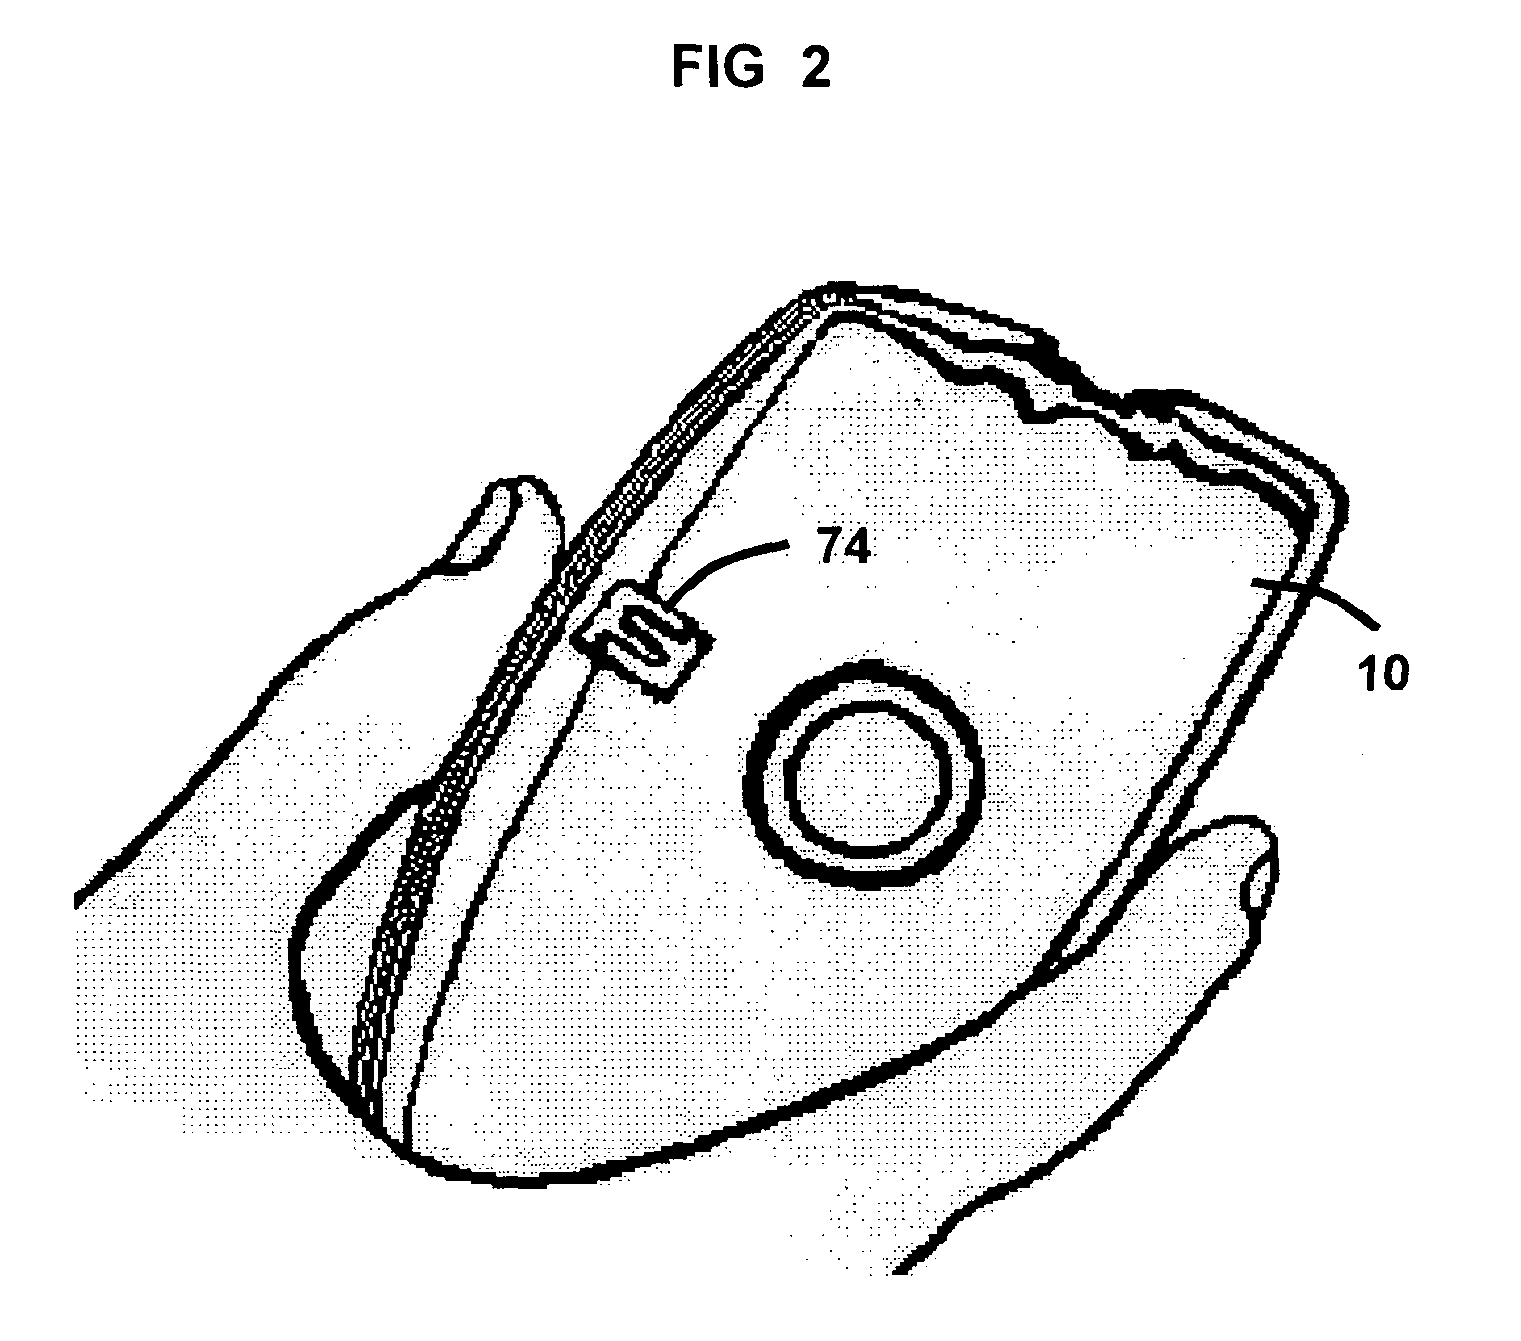 Input device to continuously detect biometrics